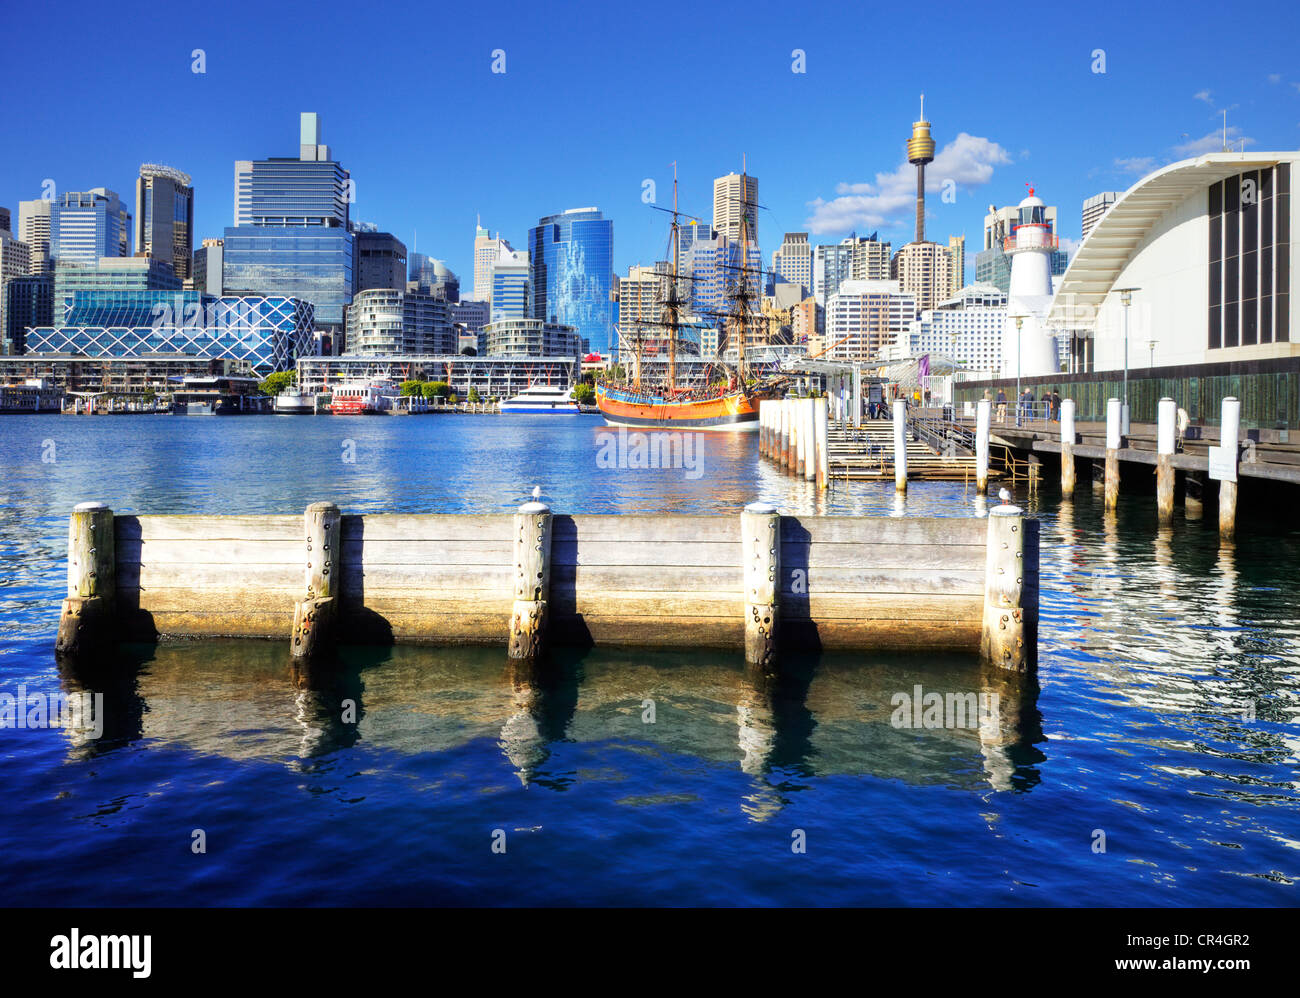 Darling Harbour, Sydney, Australia, on a bright sunny day. Stock Photo